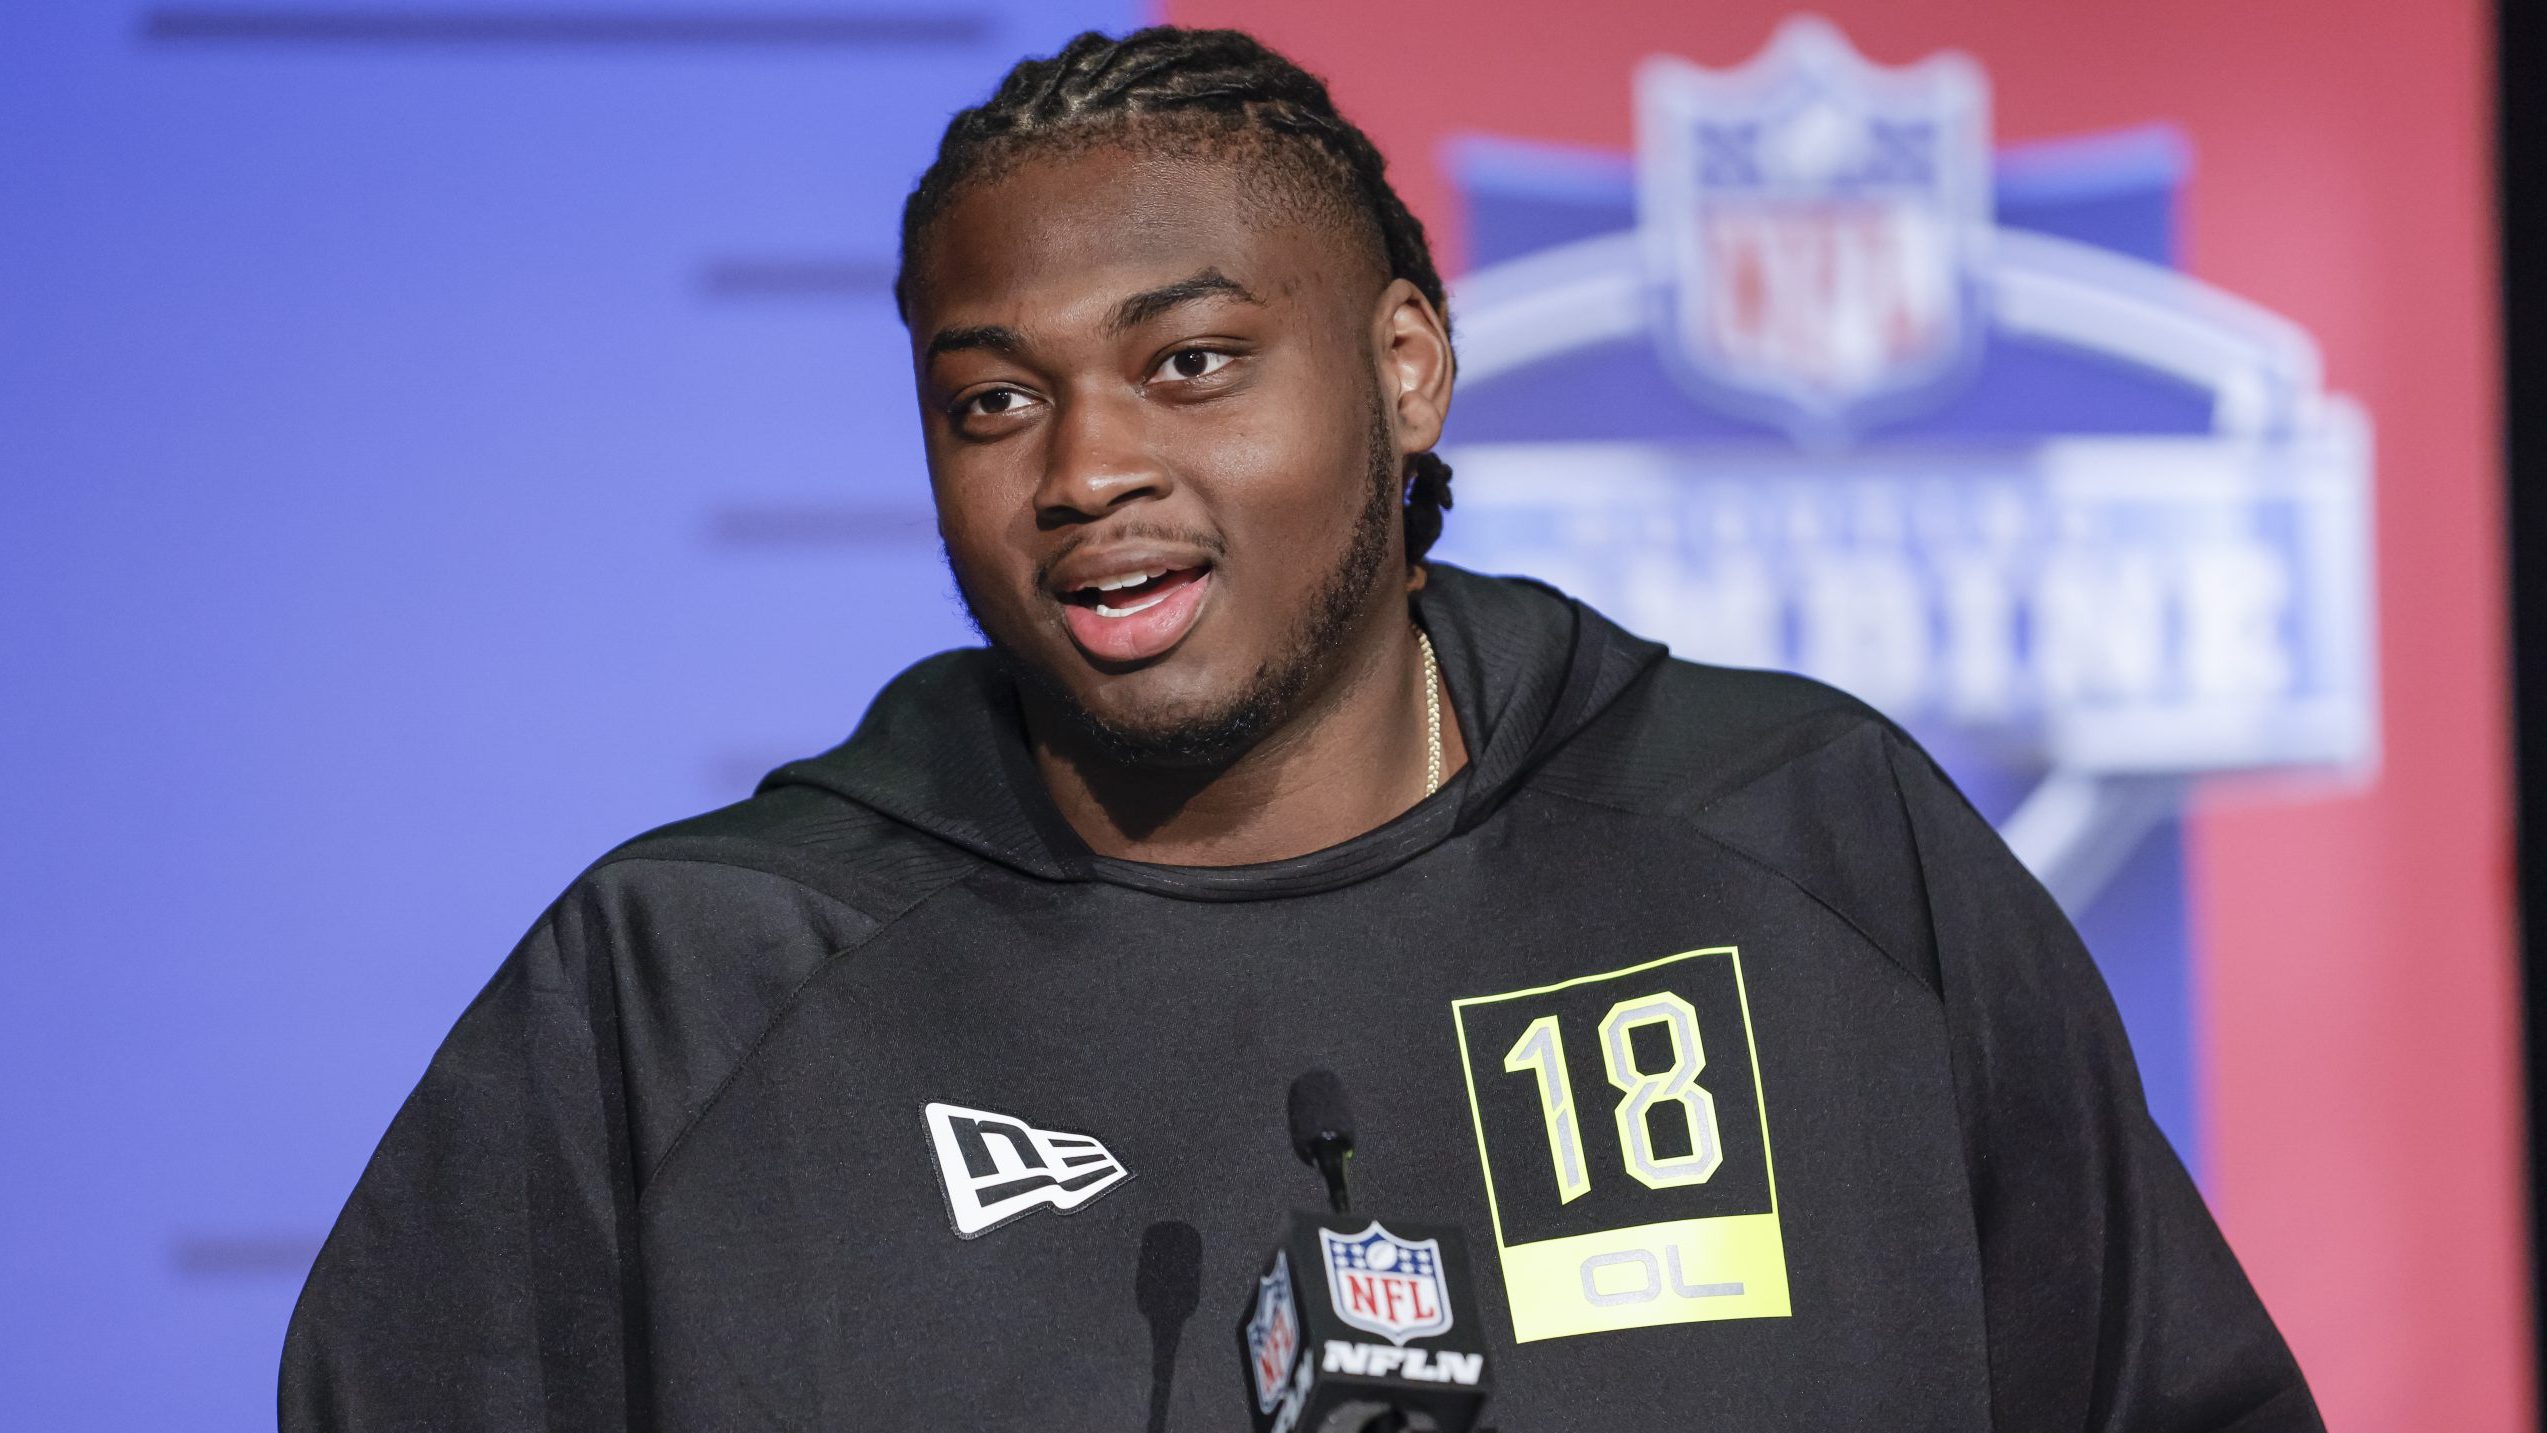 Kenyon Green #OL18 of the Texas A&M Aggies speaks to reporters during the NFL Draft Combine at the ...